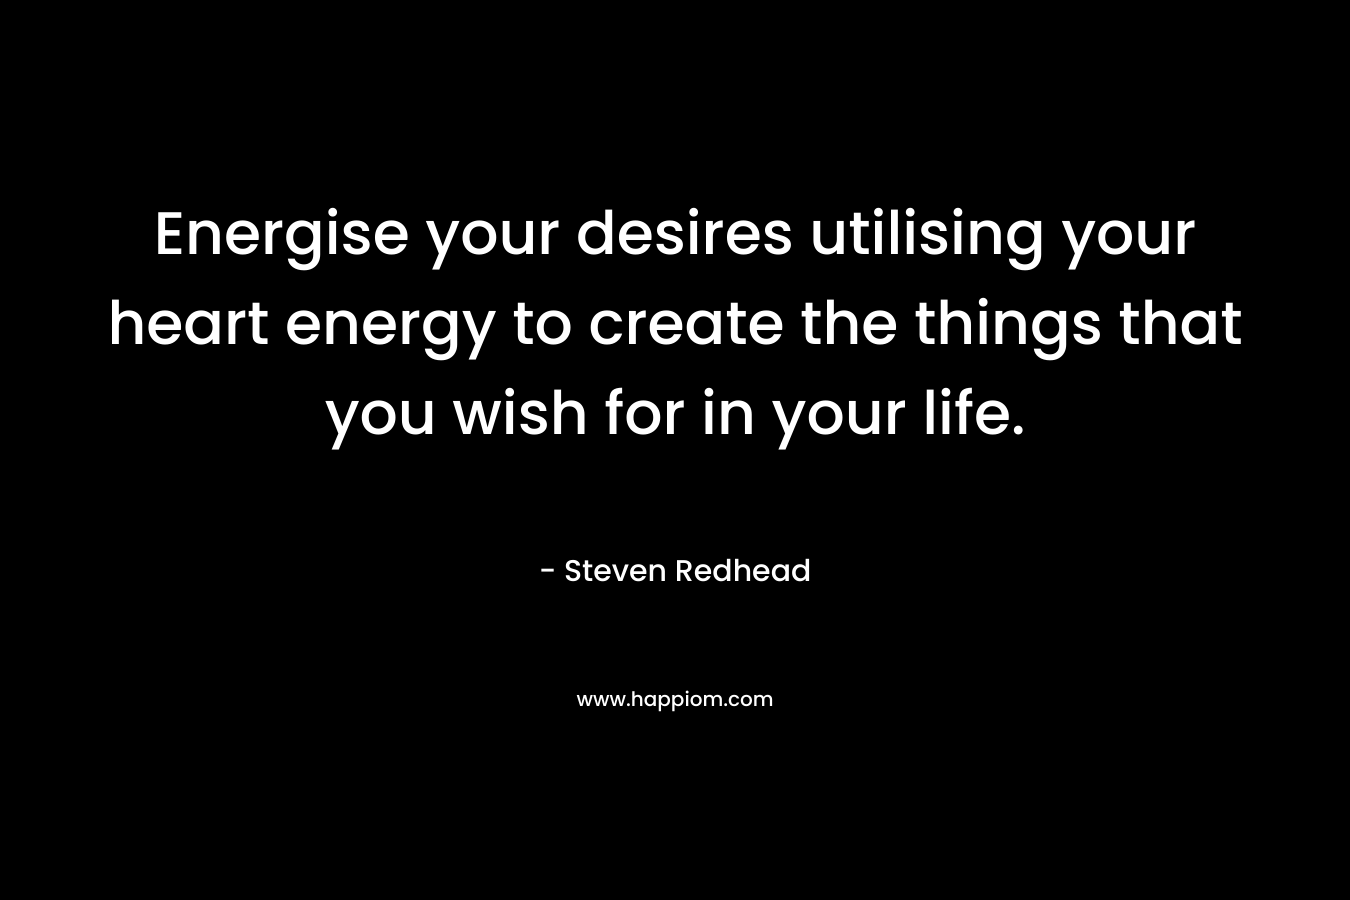 Energise your desires utilising your heart energy to create the things that you wish for in your life. – Steven Redhead